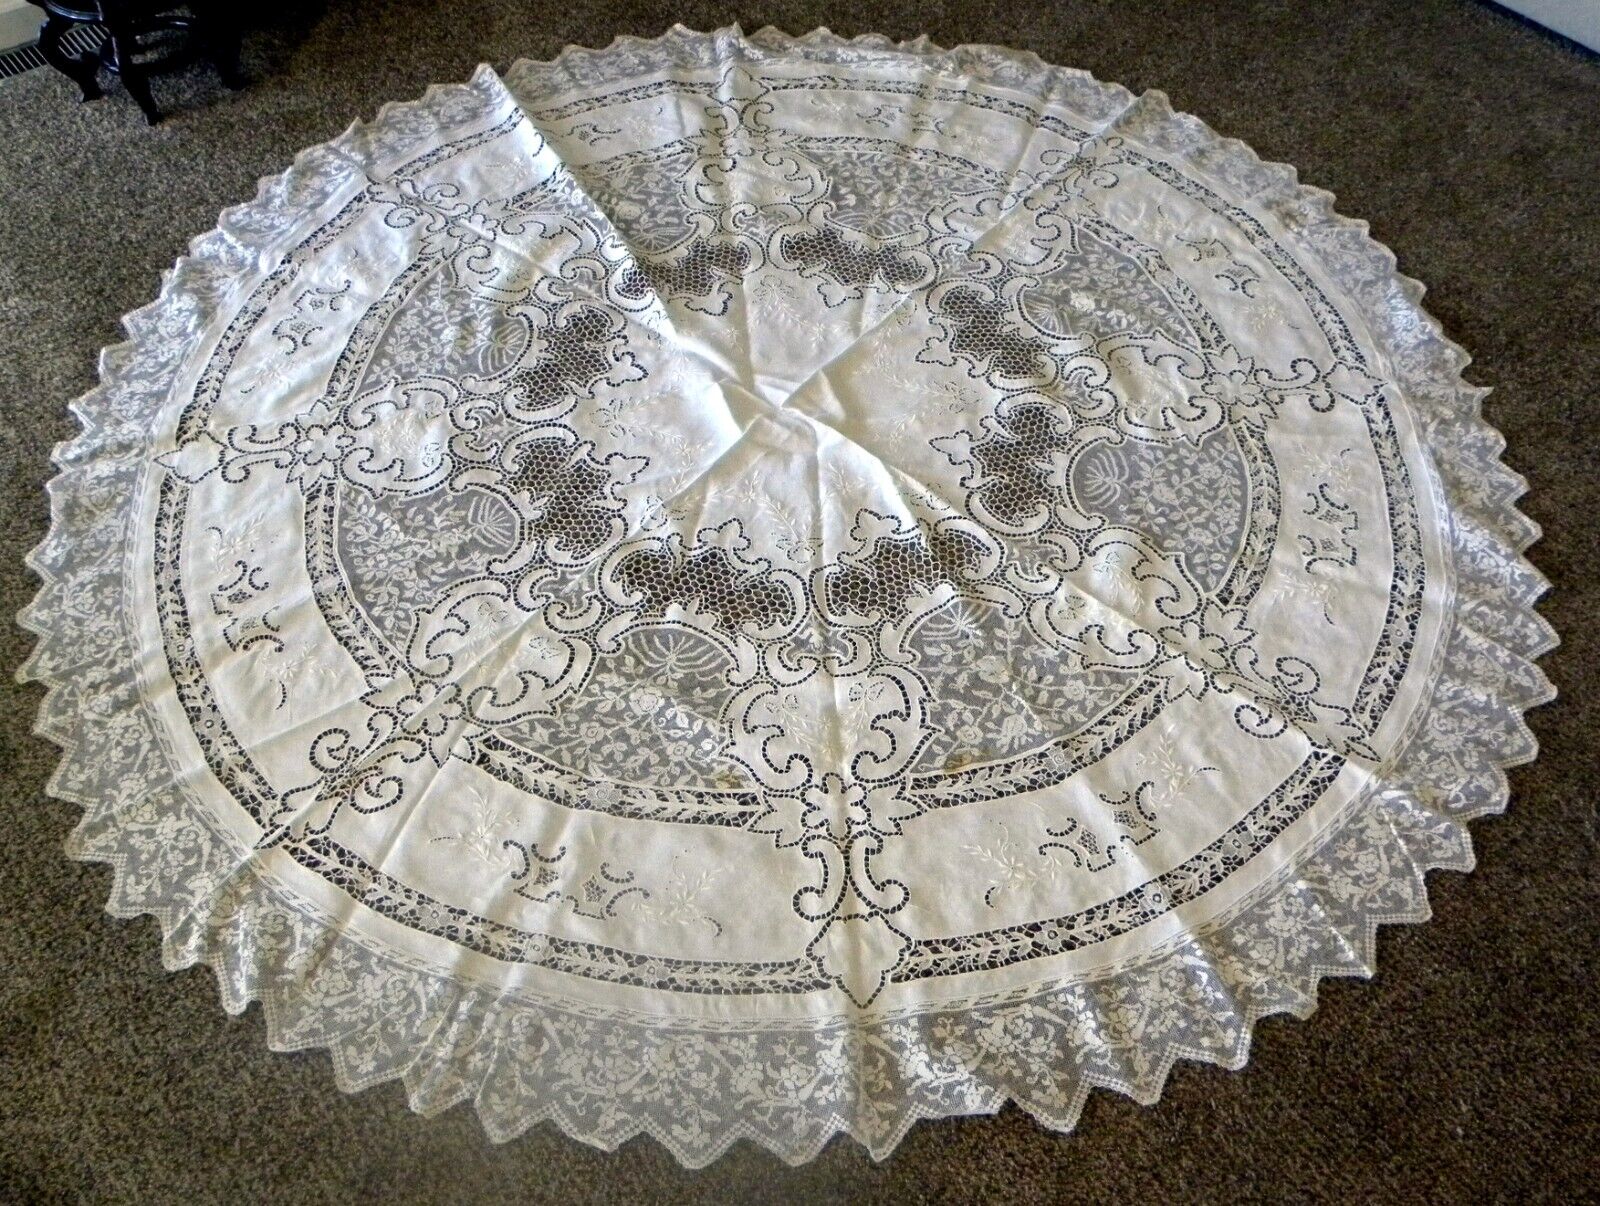 Extraordinary Round Antique White Handmade Lace Cut-work Tablecloth 81